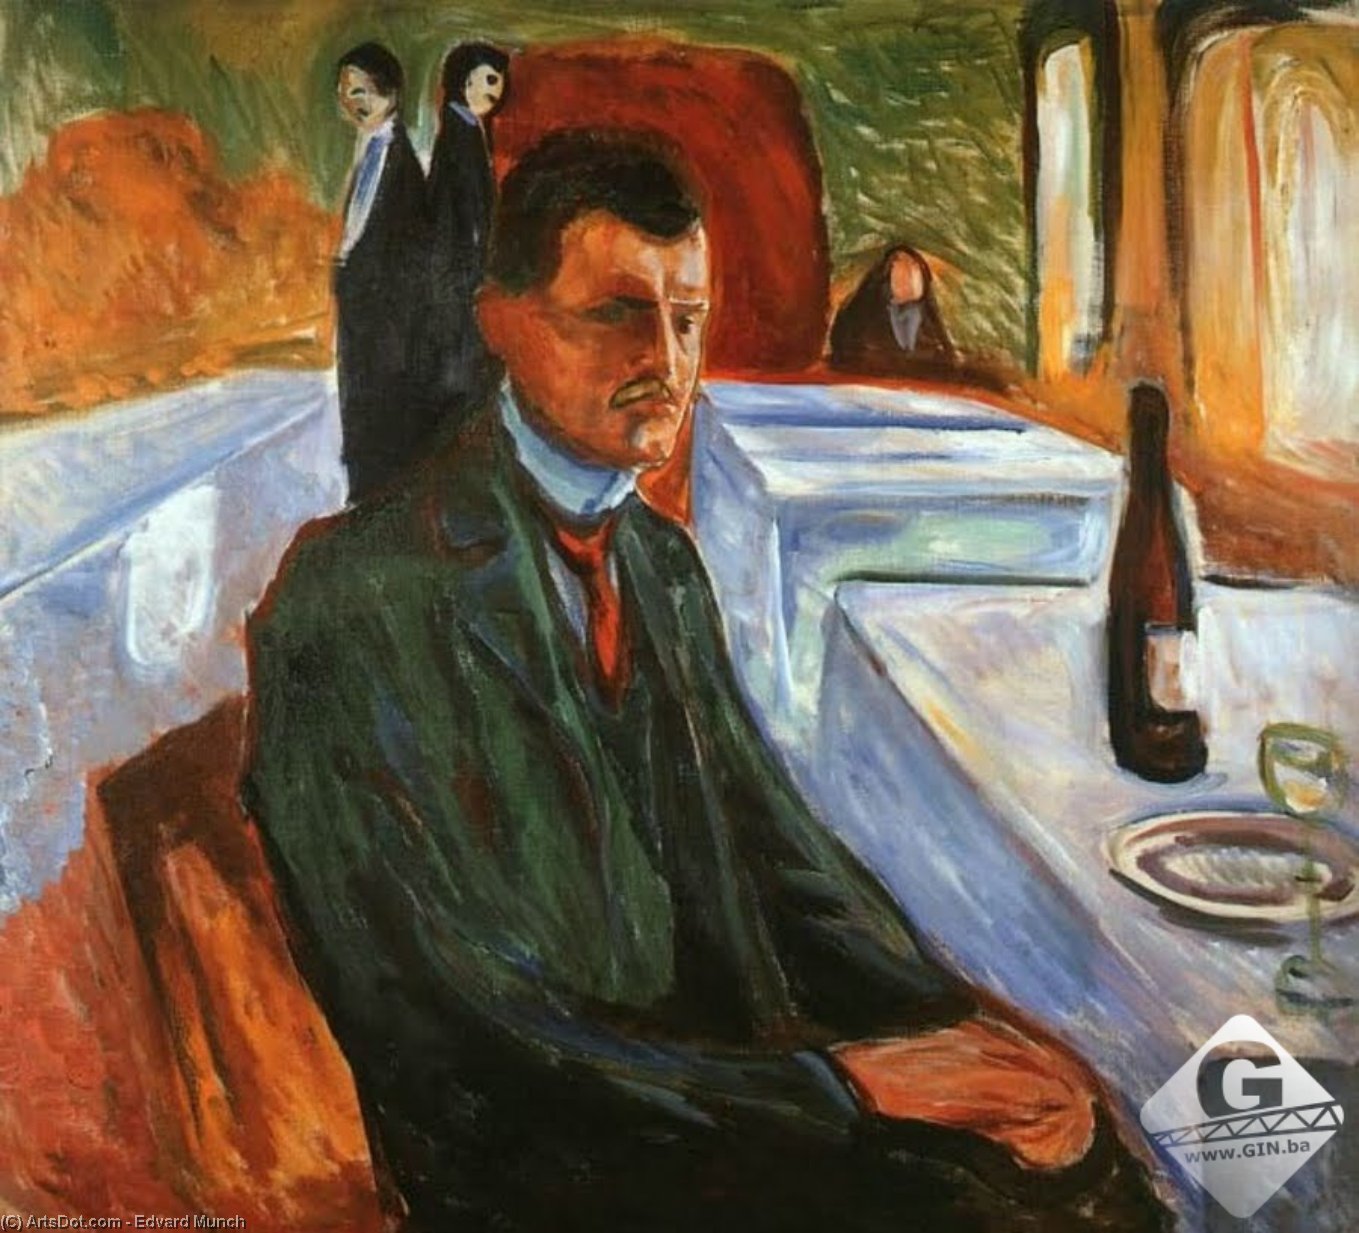 WikiOO.org - 백과 사전 - 회화, 삽화 Edvard Munch - Self-Portrait with a Wine Bottle, oil on canvas,